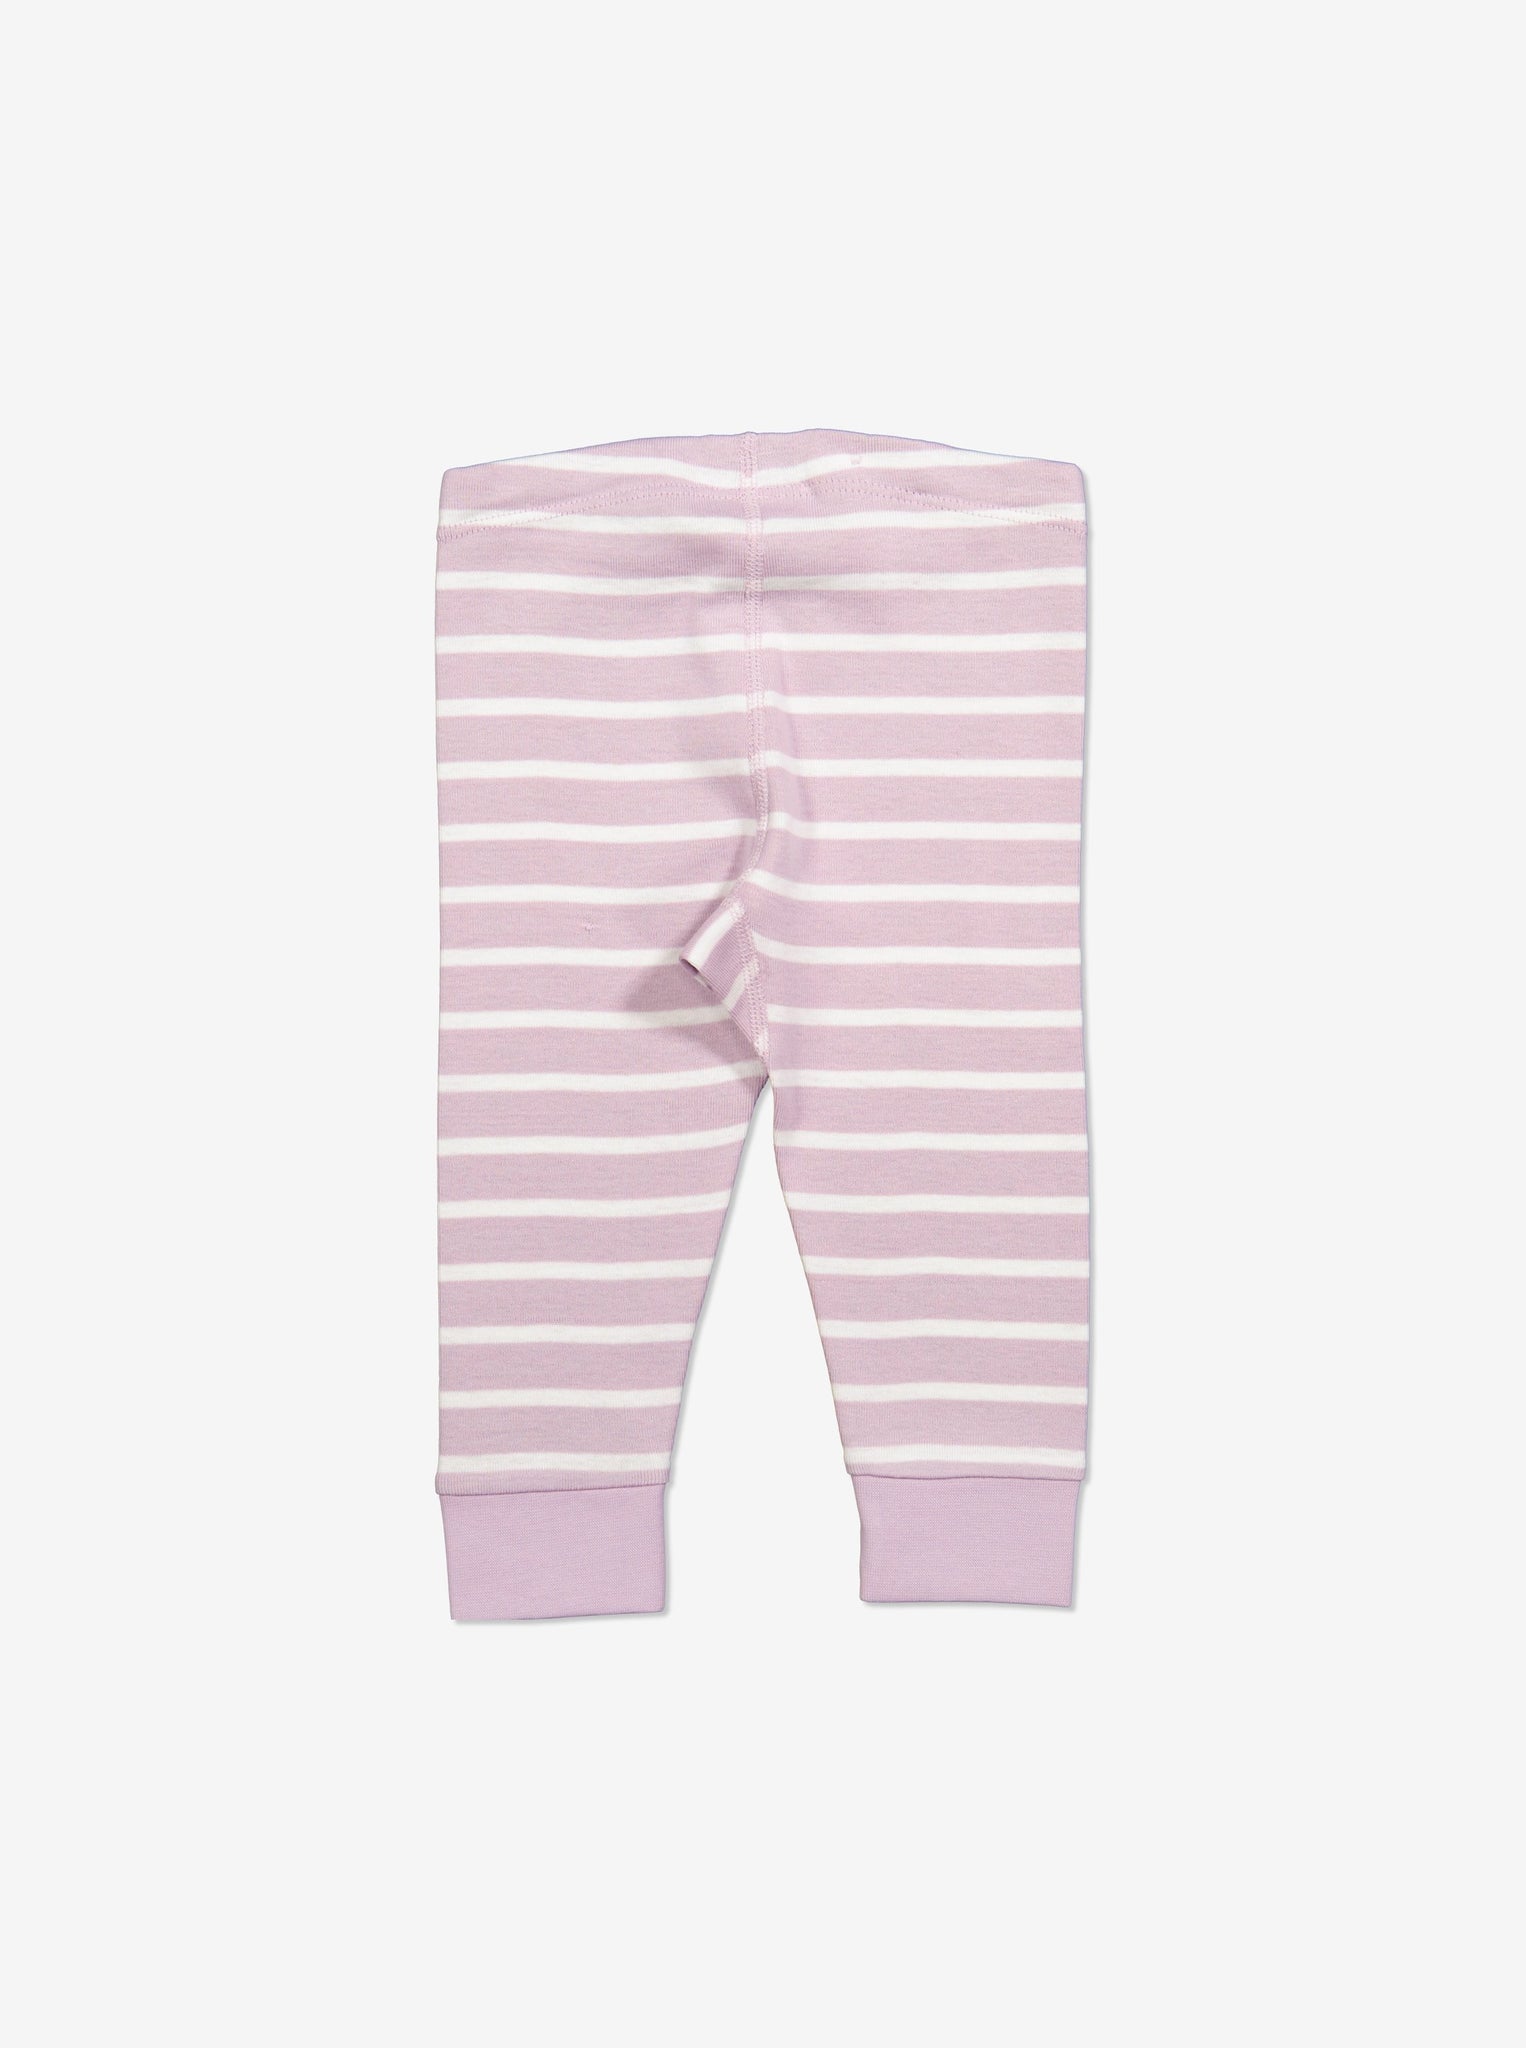  Organic Striped Pink Baby Leggings from Polarn O. Pyret Kidswear. Made with 100% organic cotton.